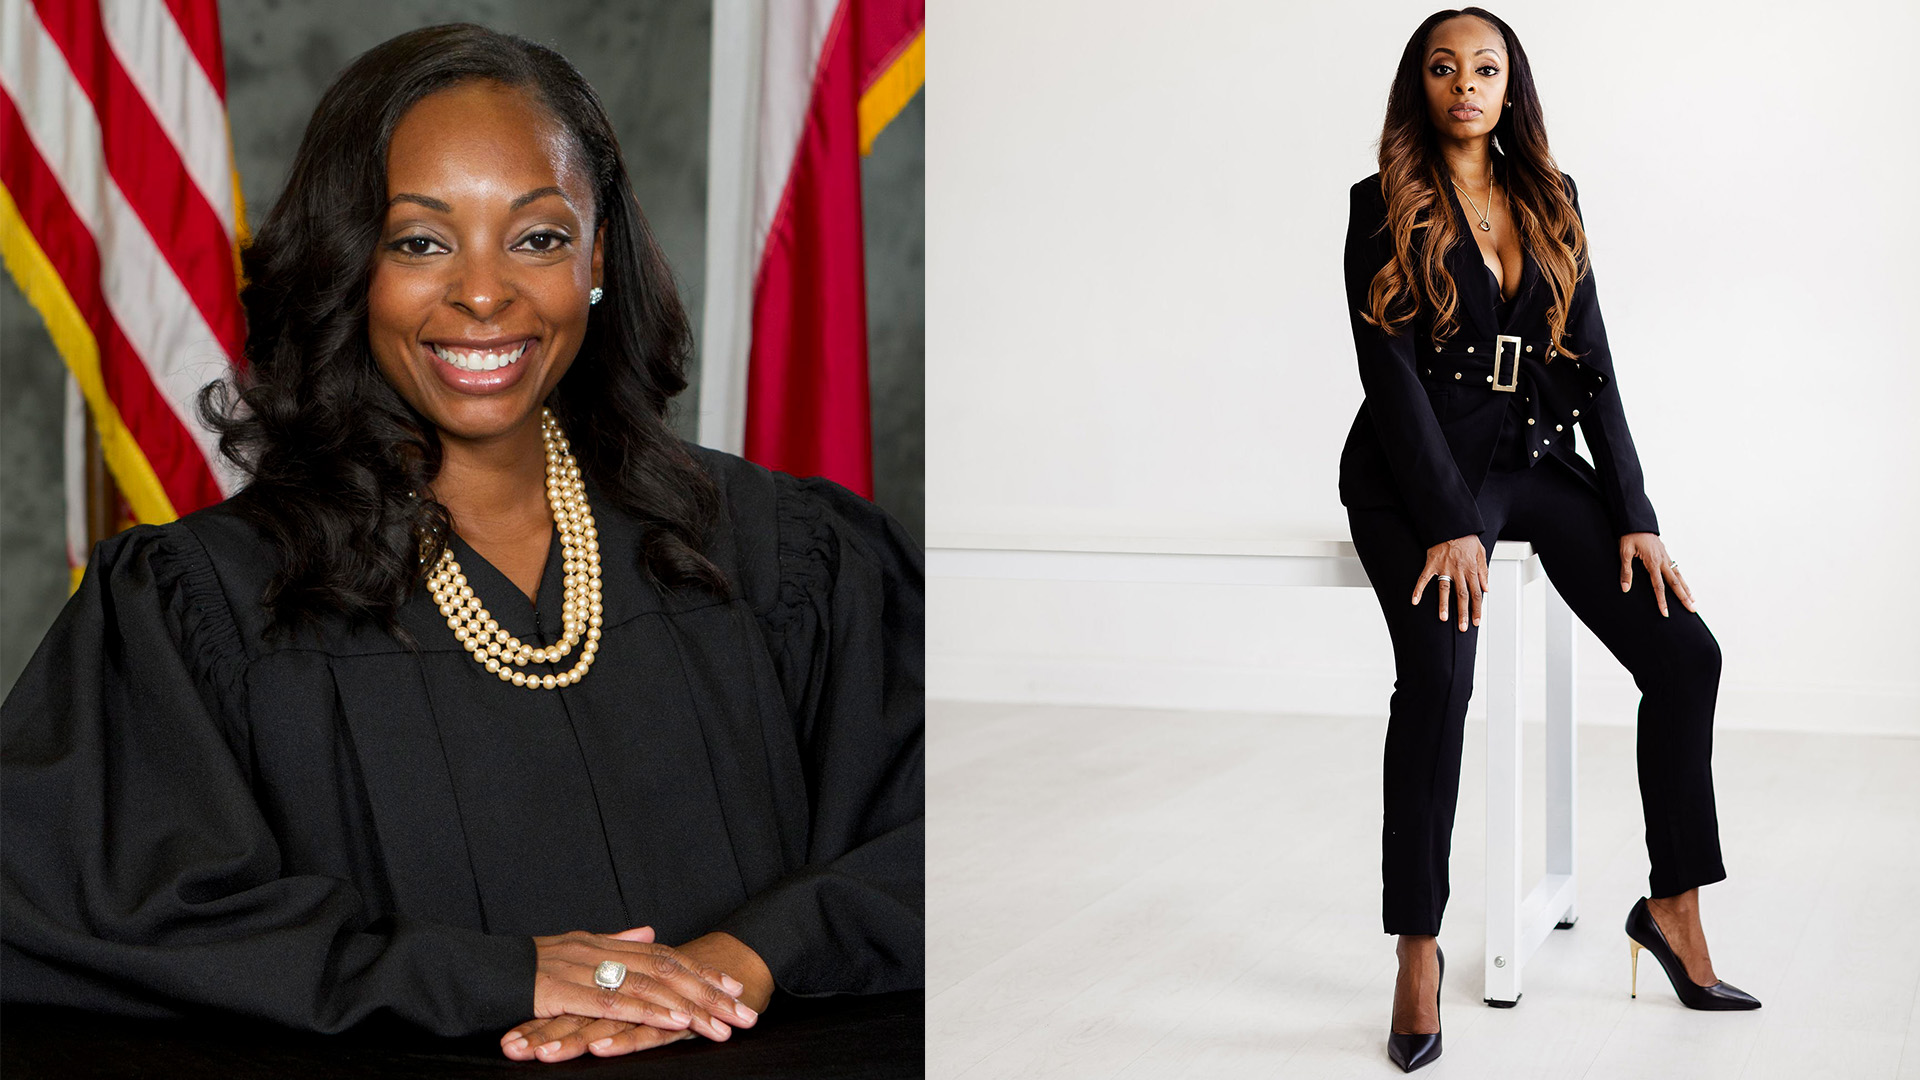 Meet Shequitta Kelly, The Black Woman Court Judge By Day And Entrepreneur By Night